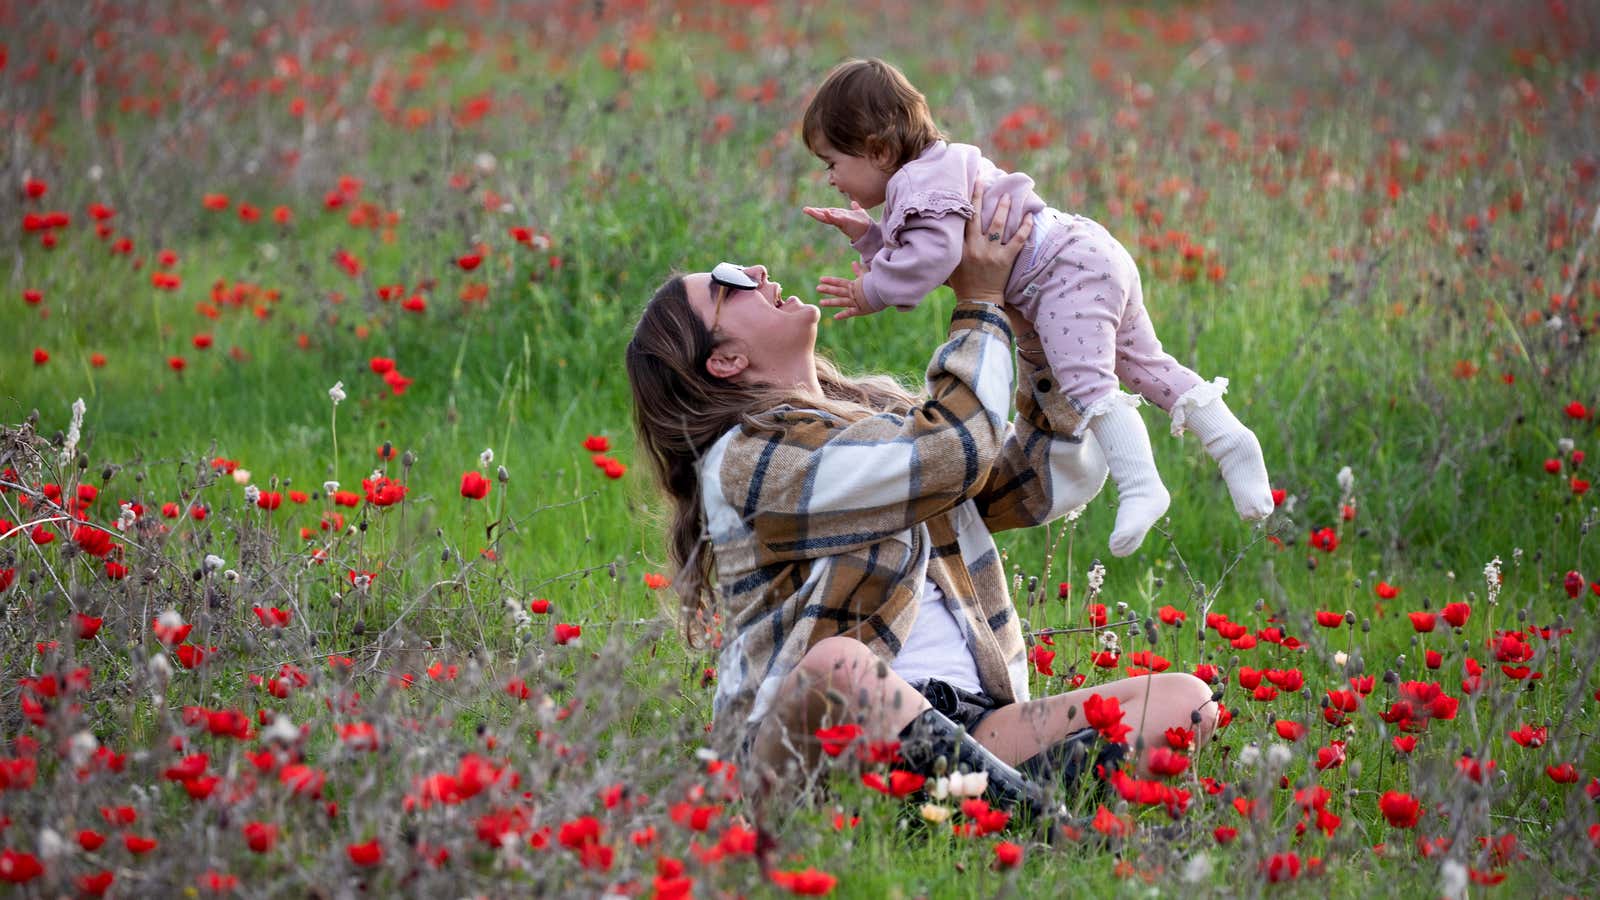 A woman plays with a child in an anemones field near Kibbutz Beeri in southern Israel, February 8, 2021.